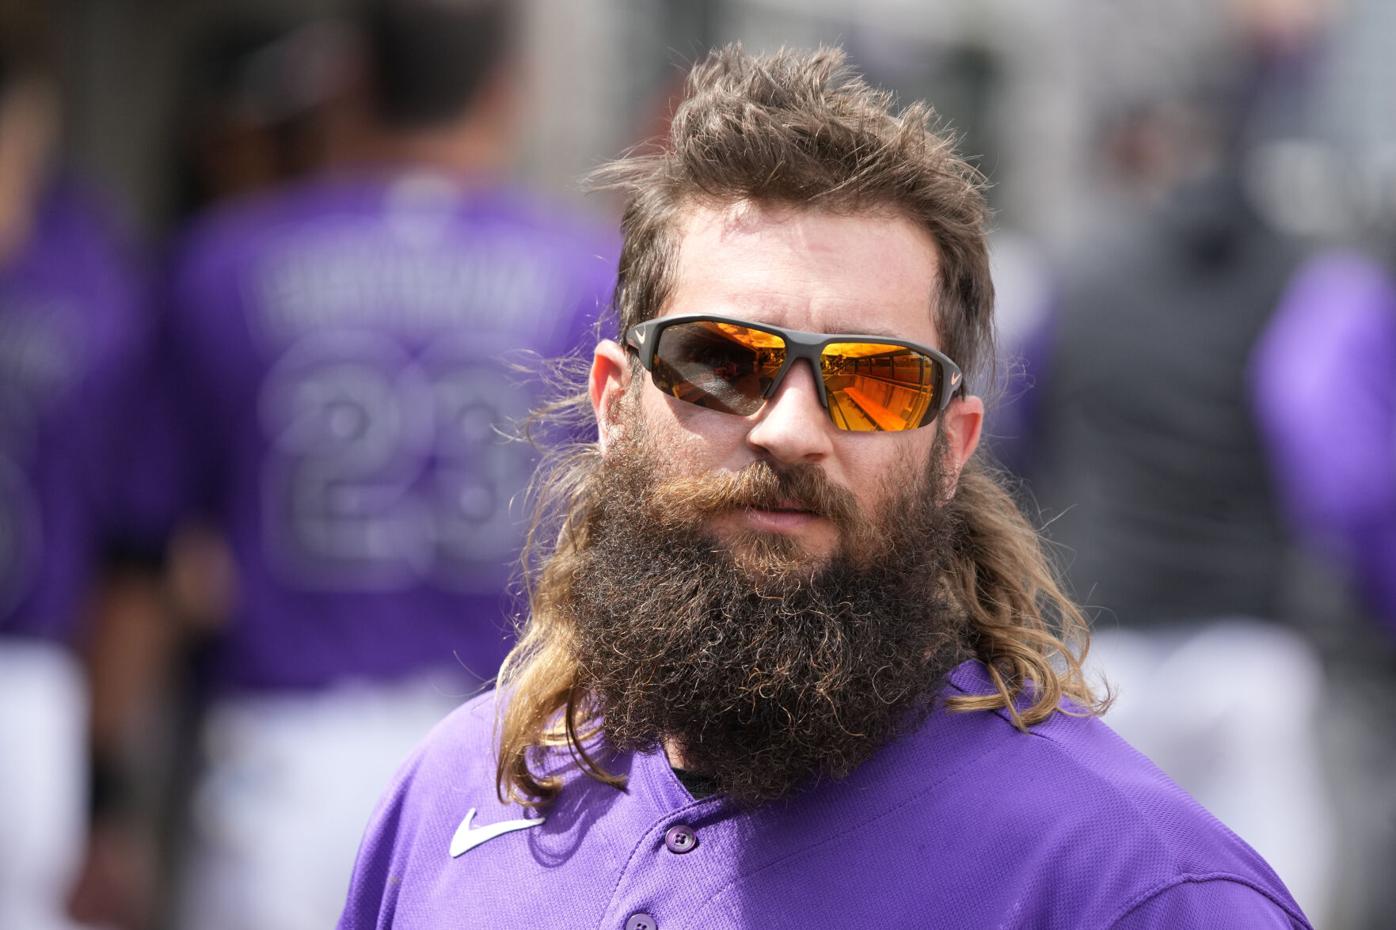 North Gwinnett grad Charlie Blackmon is first MLB player to sign deal with  sportsbook, Sports